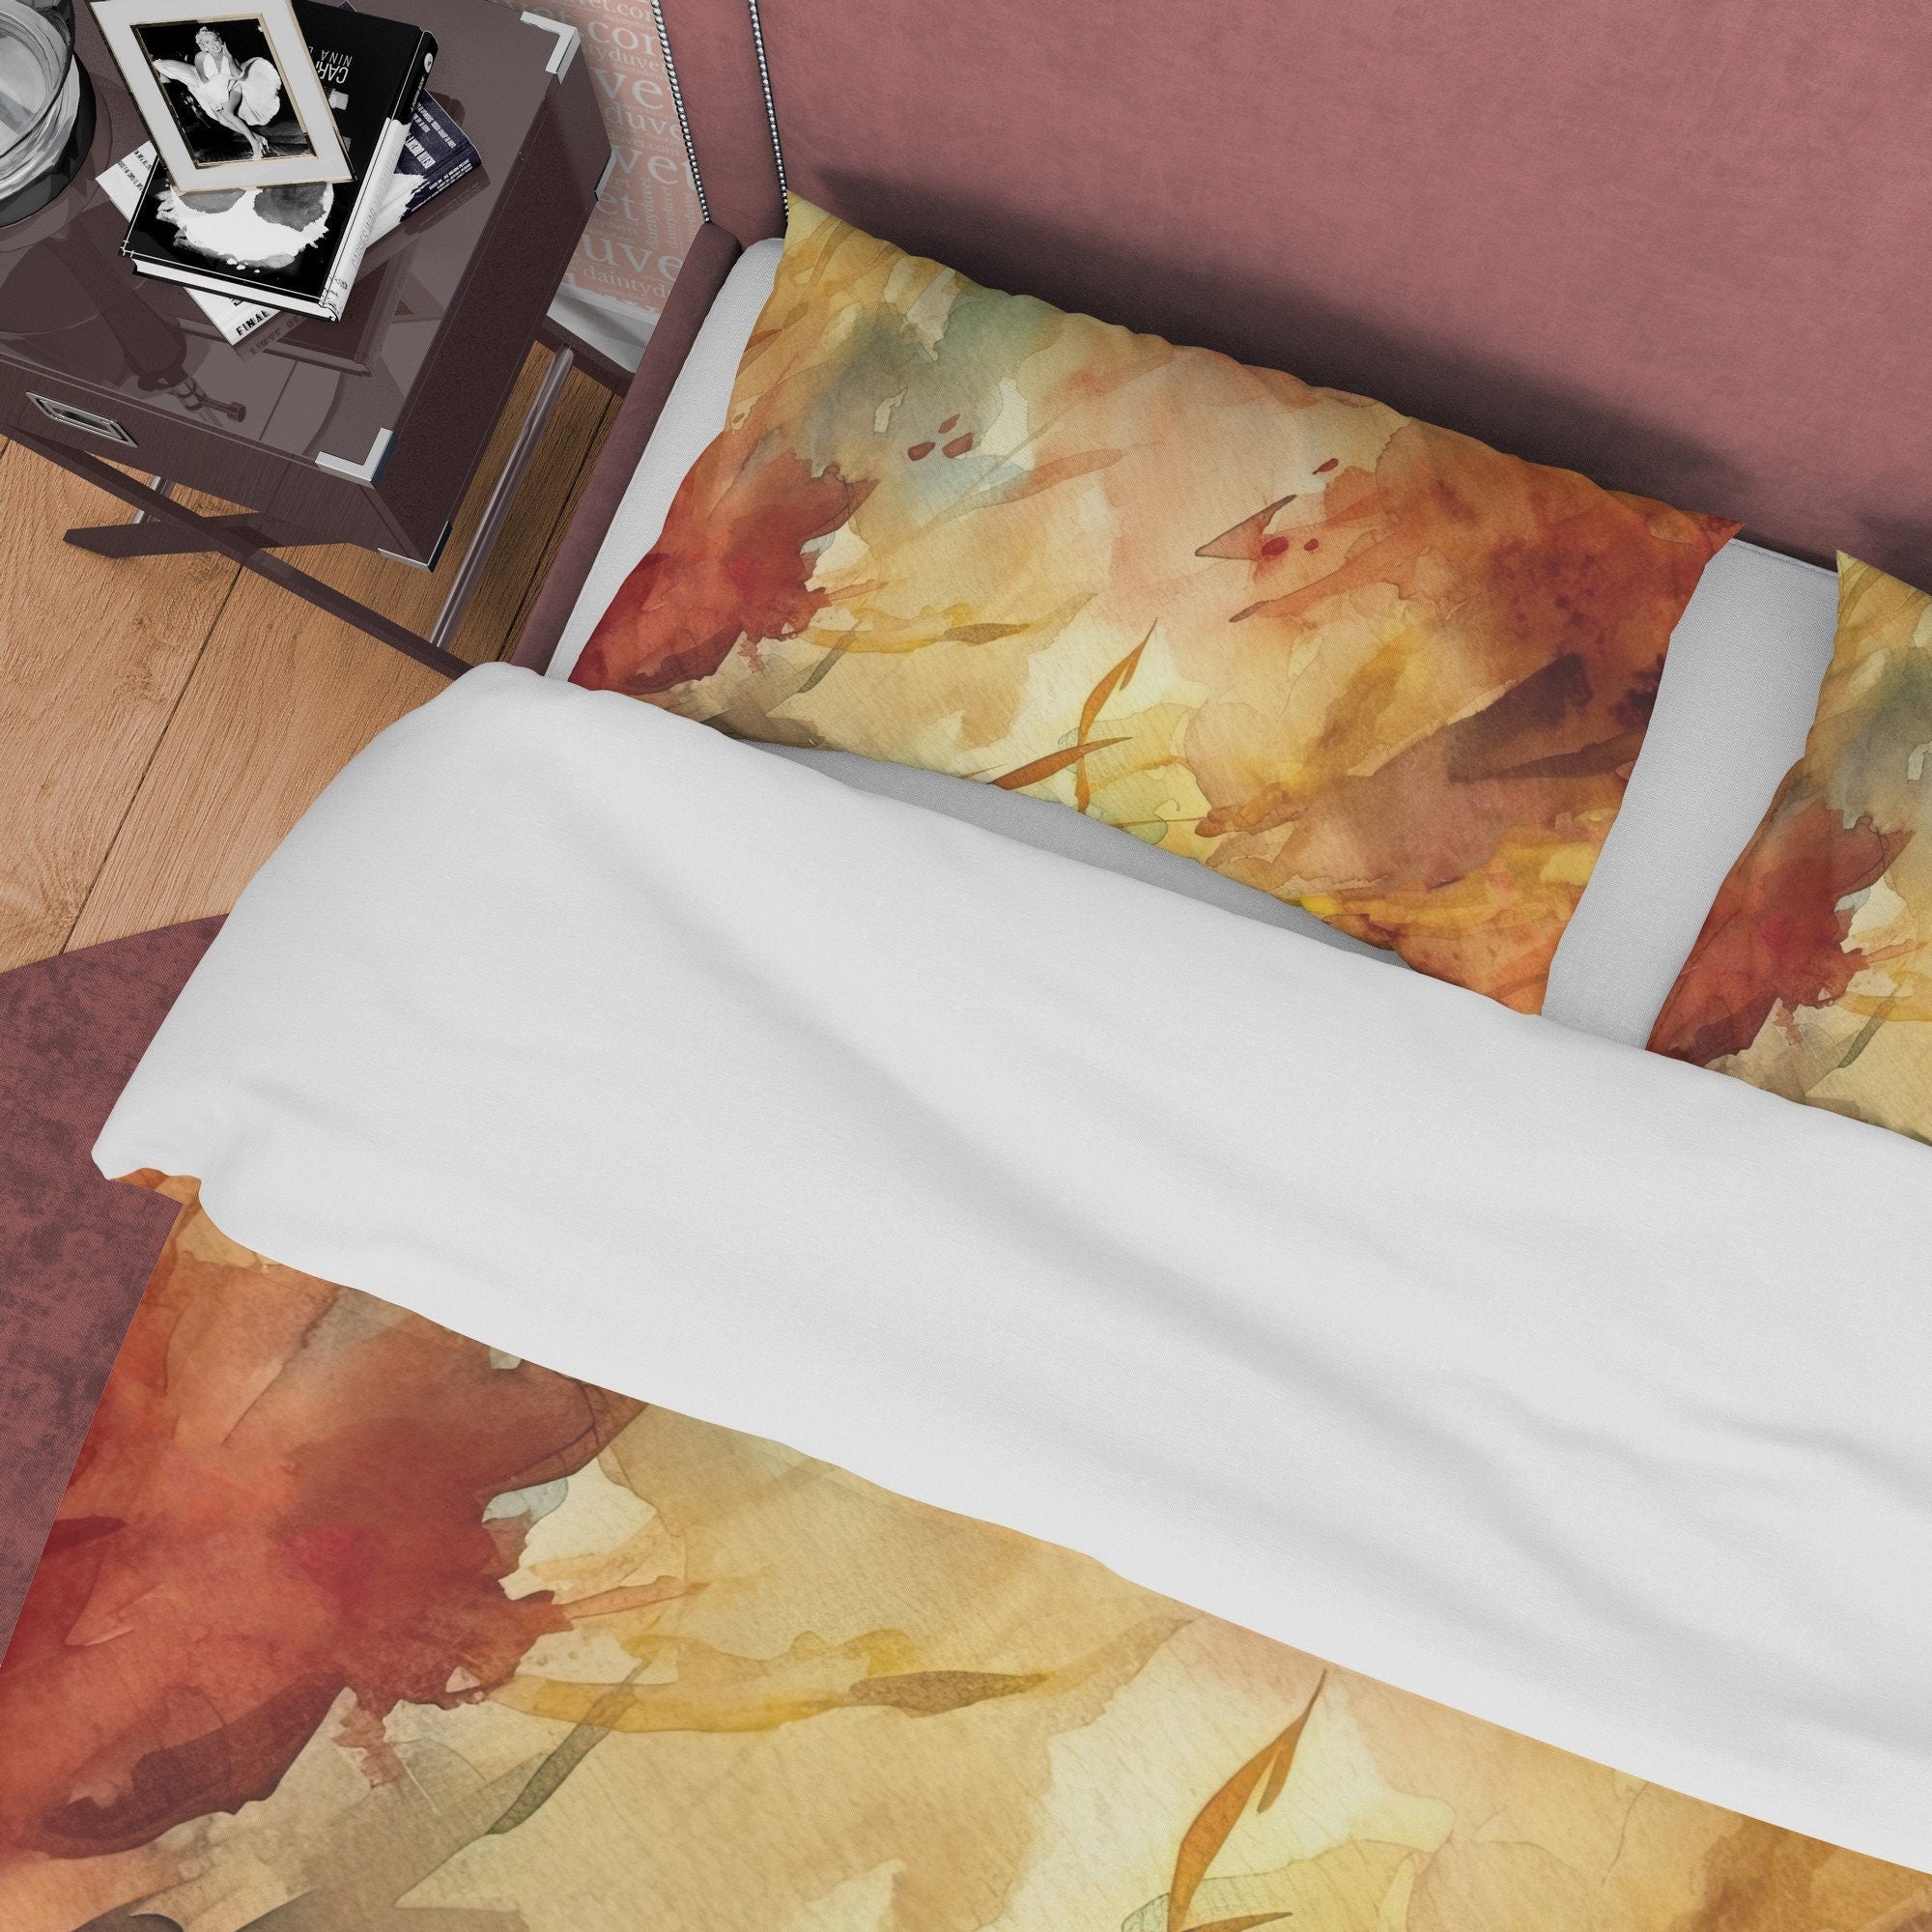 Yellow Brown Abstract Autumn Duvet Cover Fall Bedding Set, Neutral Colors Aesthetic Quilt Cover, Boho Bedspread, Paint Printed Bed Cover